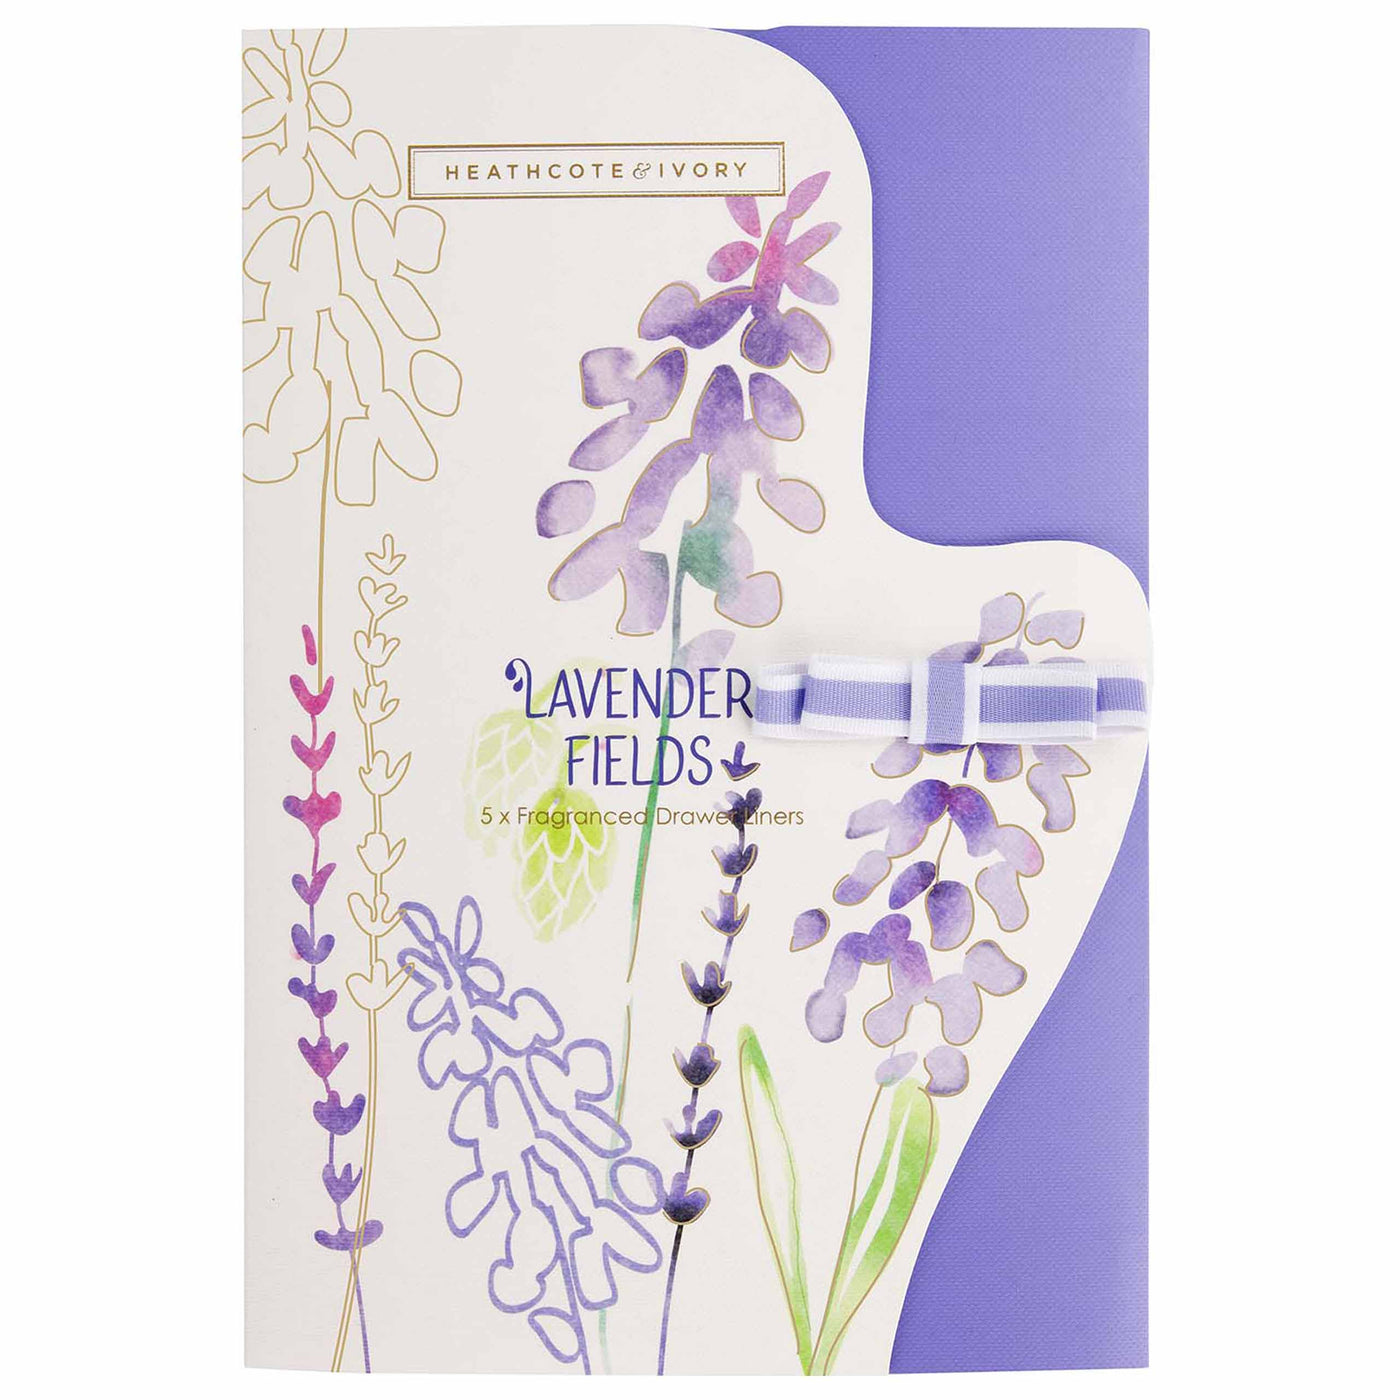 Lavender Fields Fragranced Drawer Liners - Heathcote & Ivory